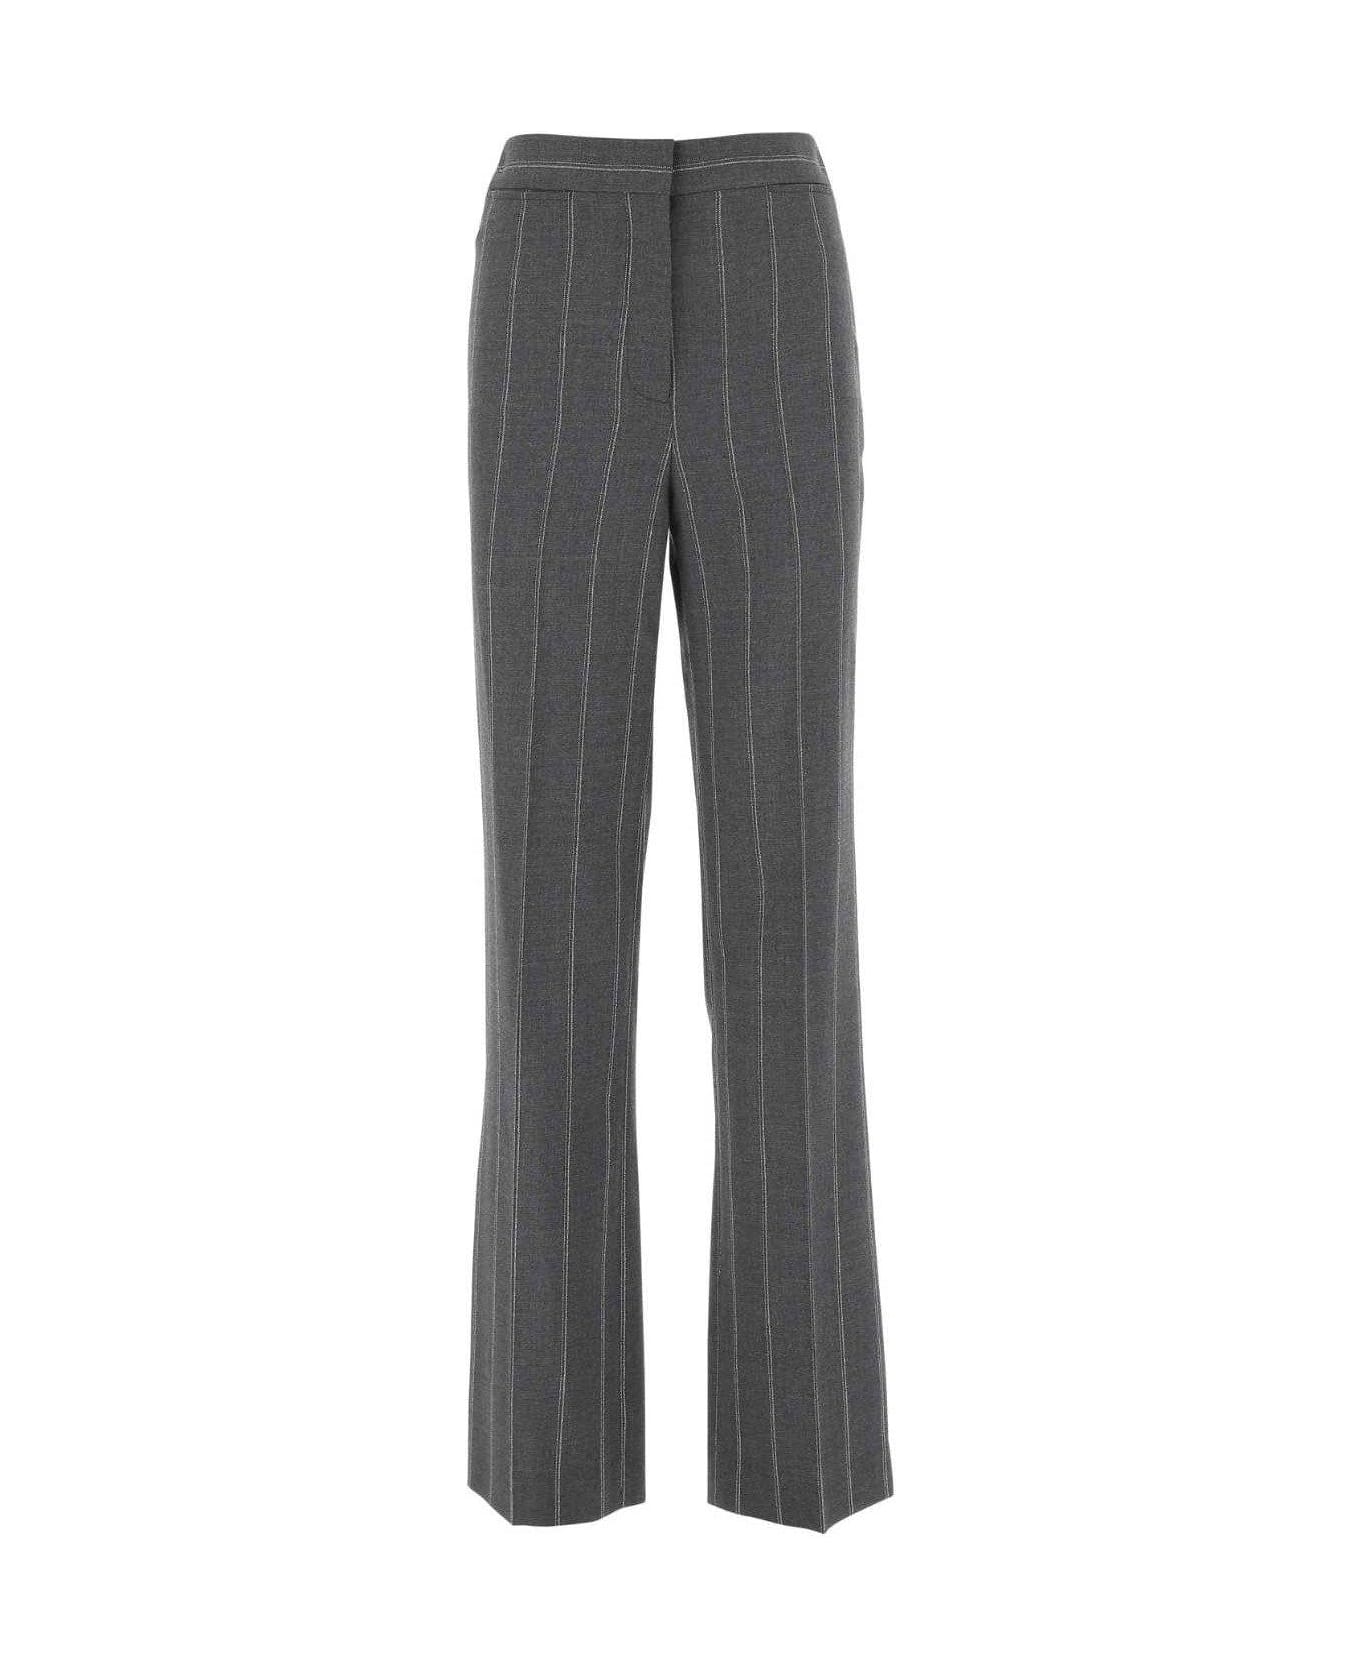 Stella McCartney Striped Tailored Trousers - Grey ボトムス